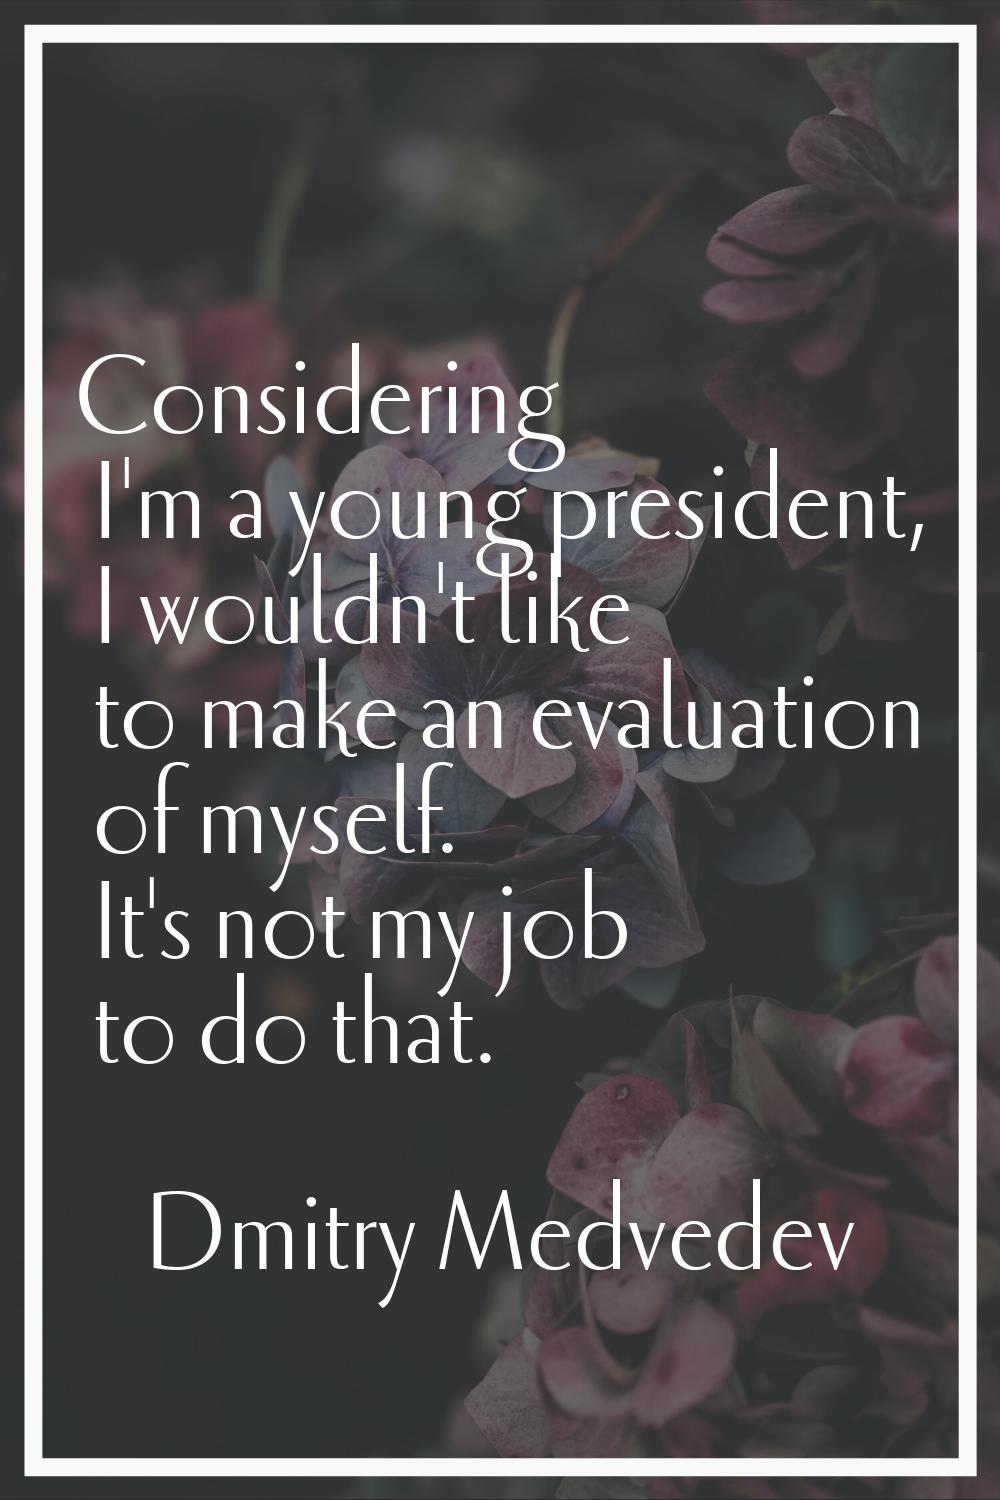 Considering I'm a young president, I wouldn't like to make an evaluation of myself. It's not my job